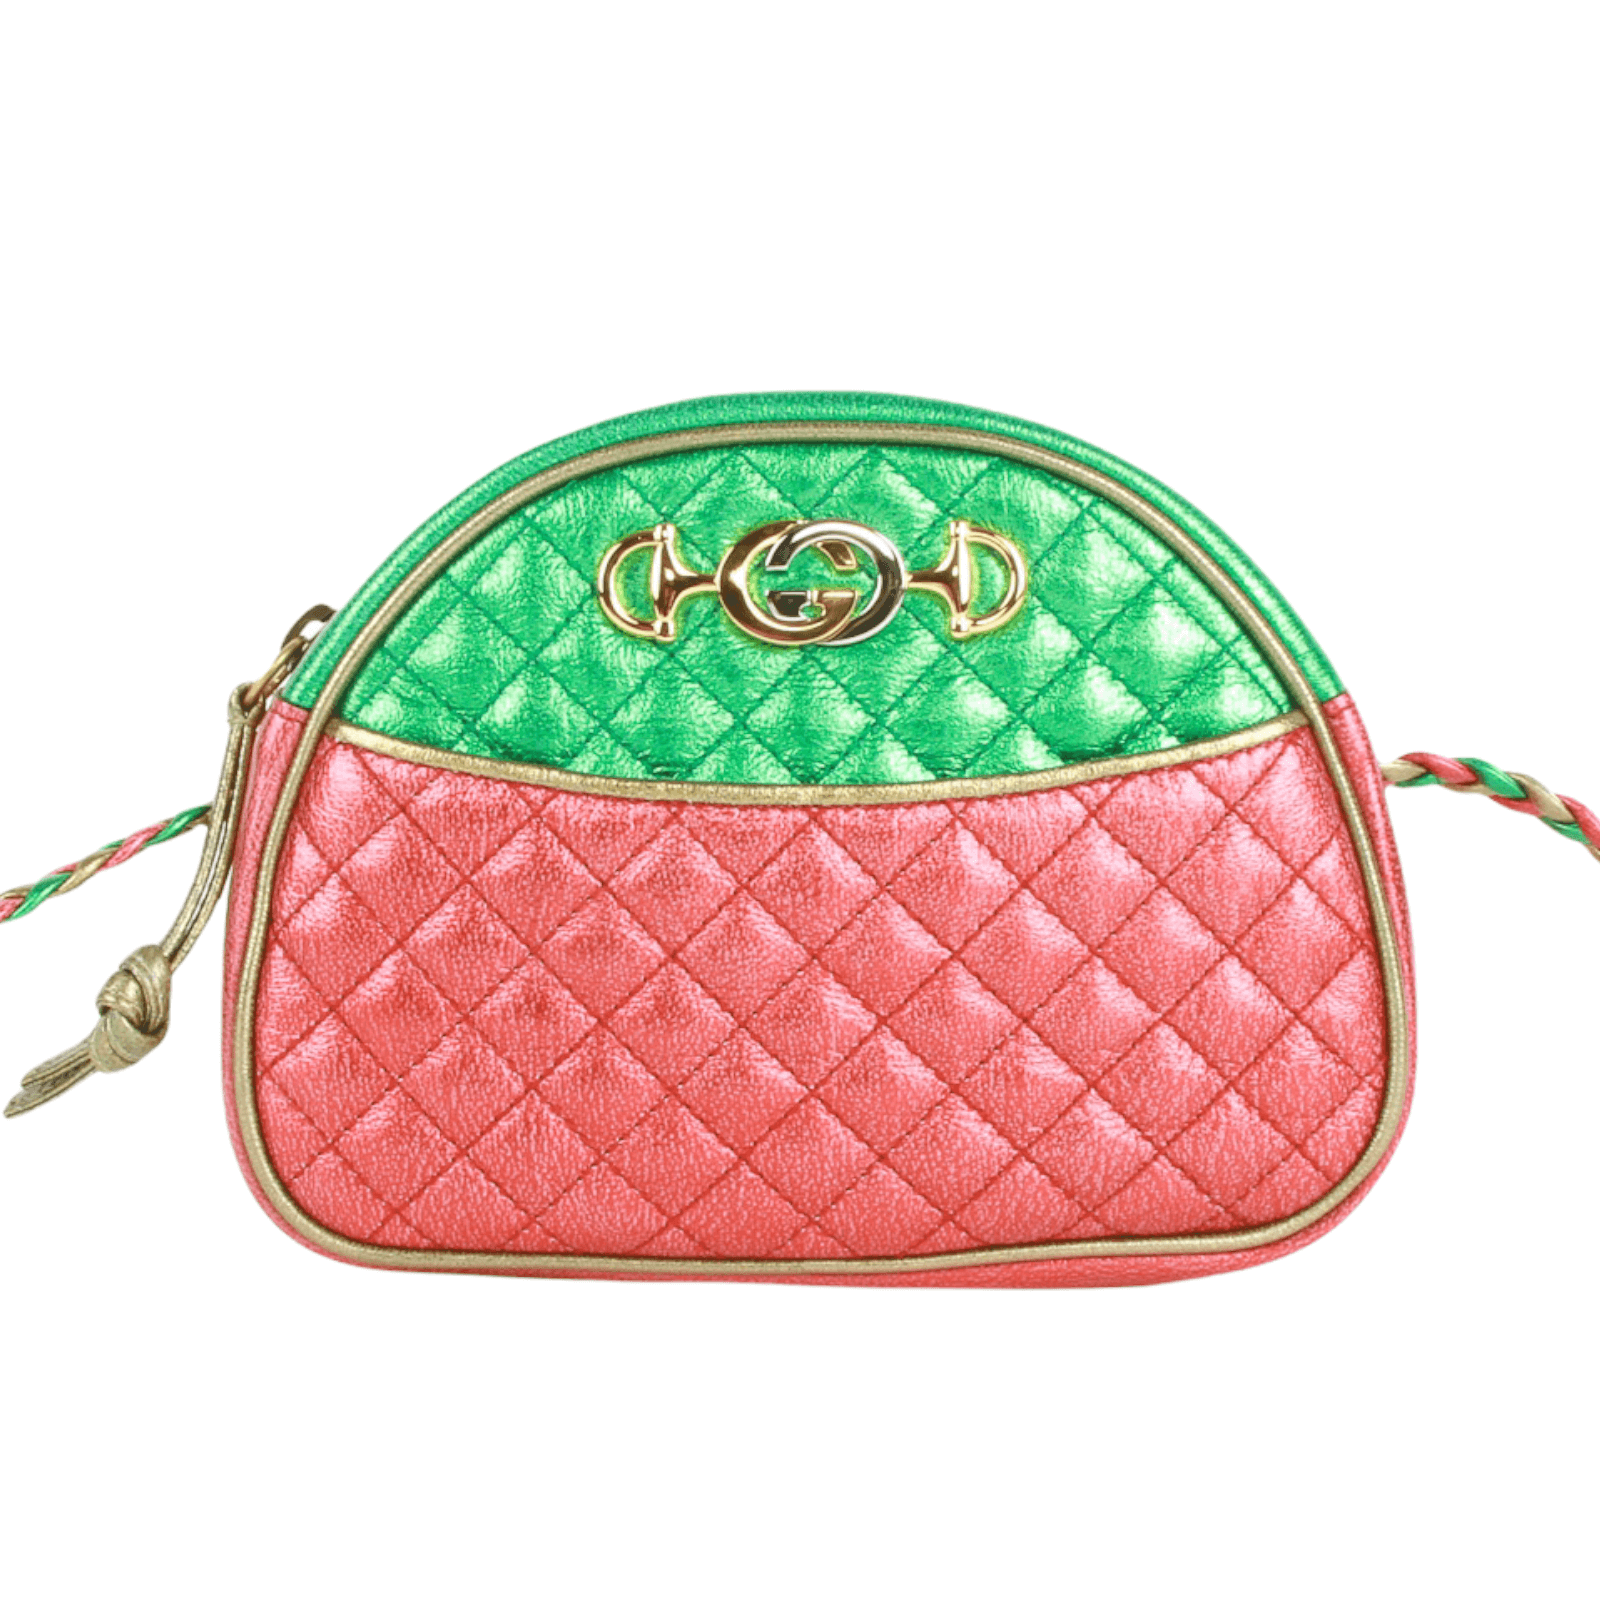 What Is  Authenticate; Designer Handbags Like Gucci